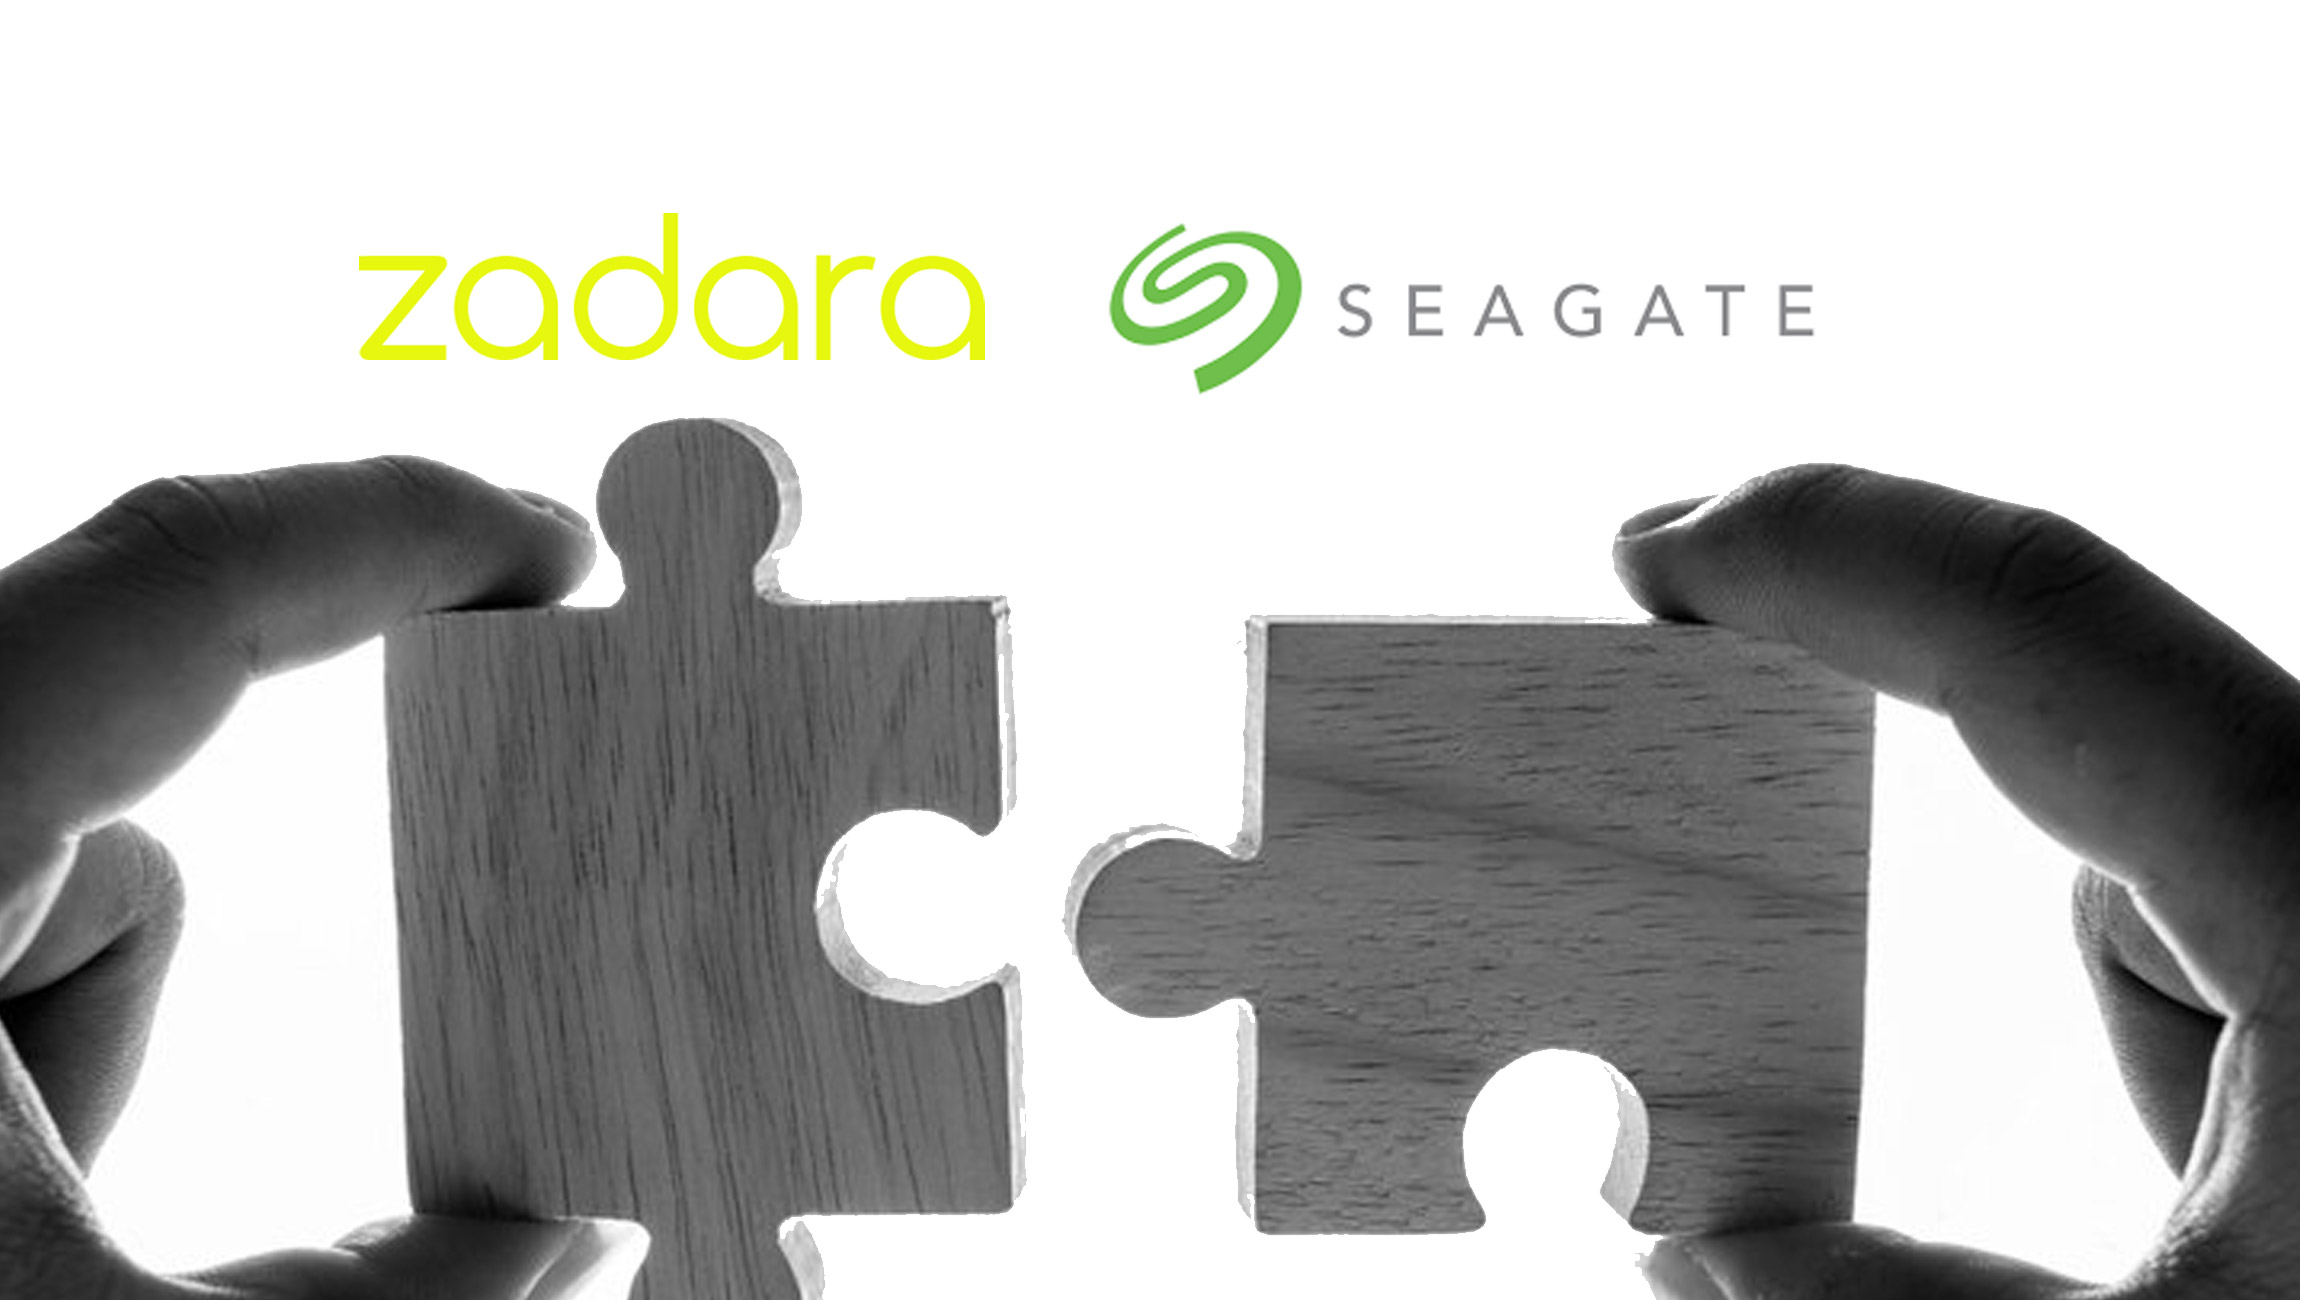 Zadara-Collaborates-with-Seagate-to-Bring-Seamless_-On-Demand-Cloud-Experience-to-Enterprise-Customers